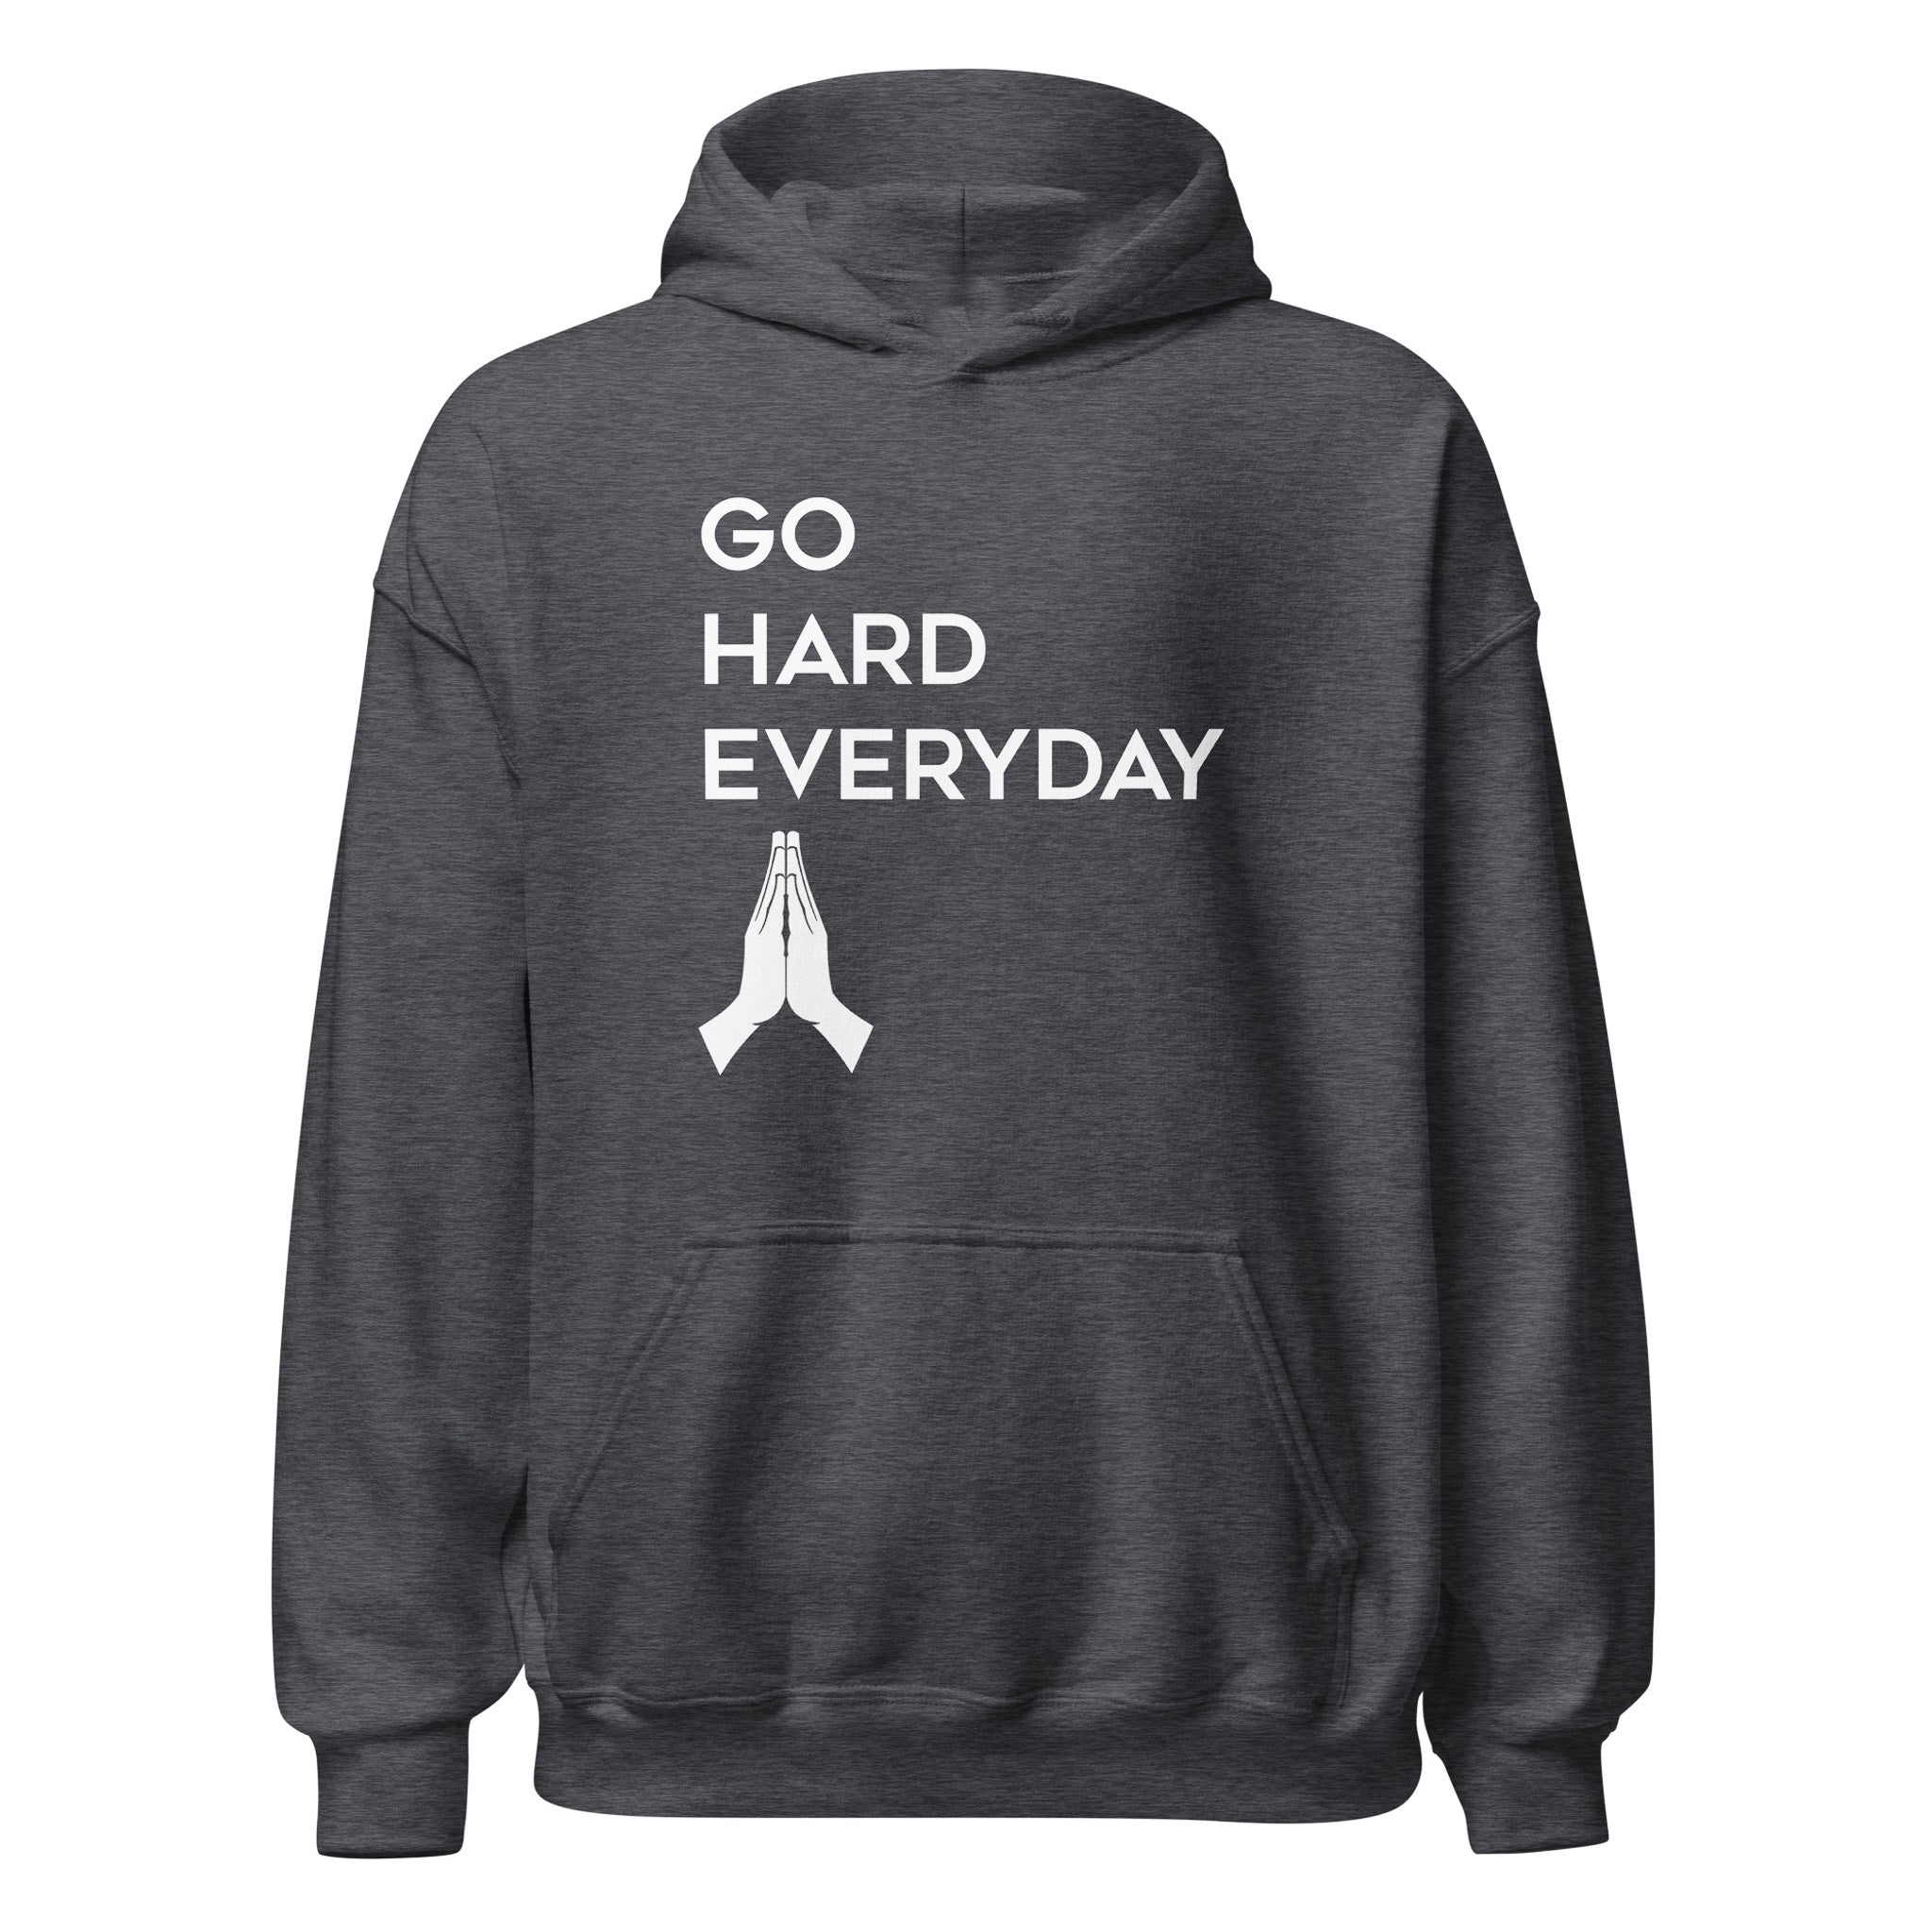 Go Hard Everyday Hoodie, Used By God, Used By God Clothing, Christian Apparel, Christian Hoodies, Christian Clothing, Christian Shirts, God Shirts, Christian Sweatshirts, God Clothing, Jesus Hoodie, christian clothing t shirts, Jesus Clothes, t-shirts about jesus, hoodies near me, Christian Tshirts, God Is Dope, Art Of Homage, Red Letter Clothing, Elevated Faith, Active Faith Sports, Beacon Threads, God The Father Apparel